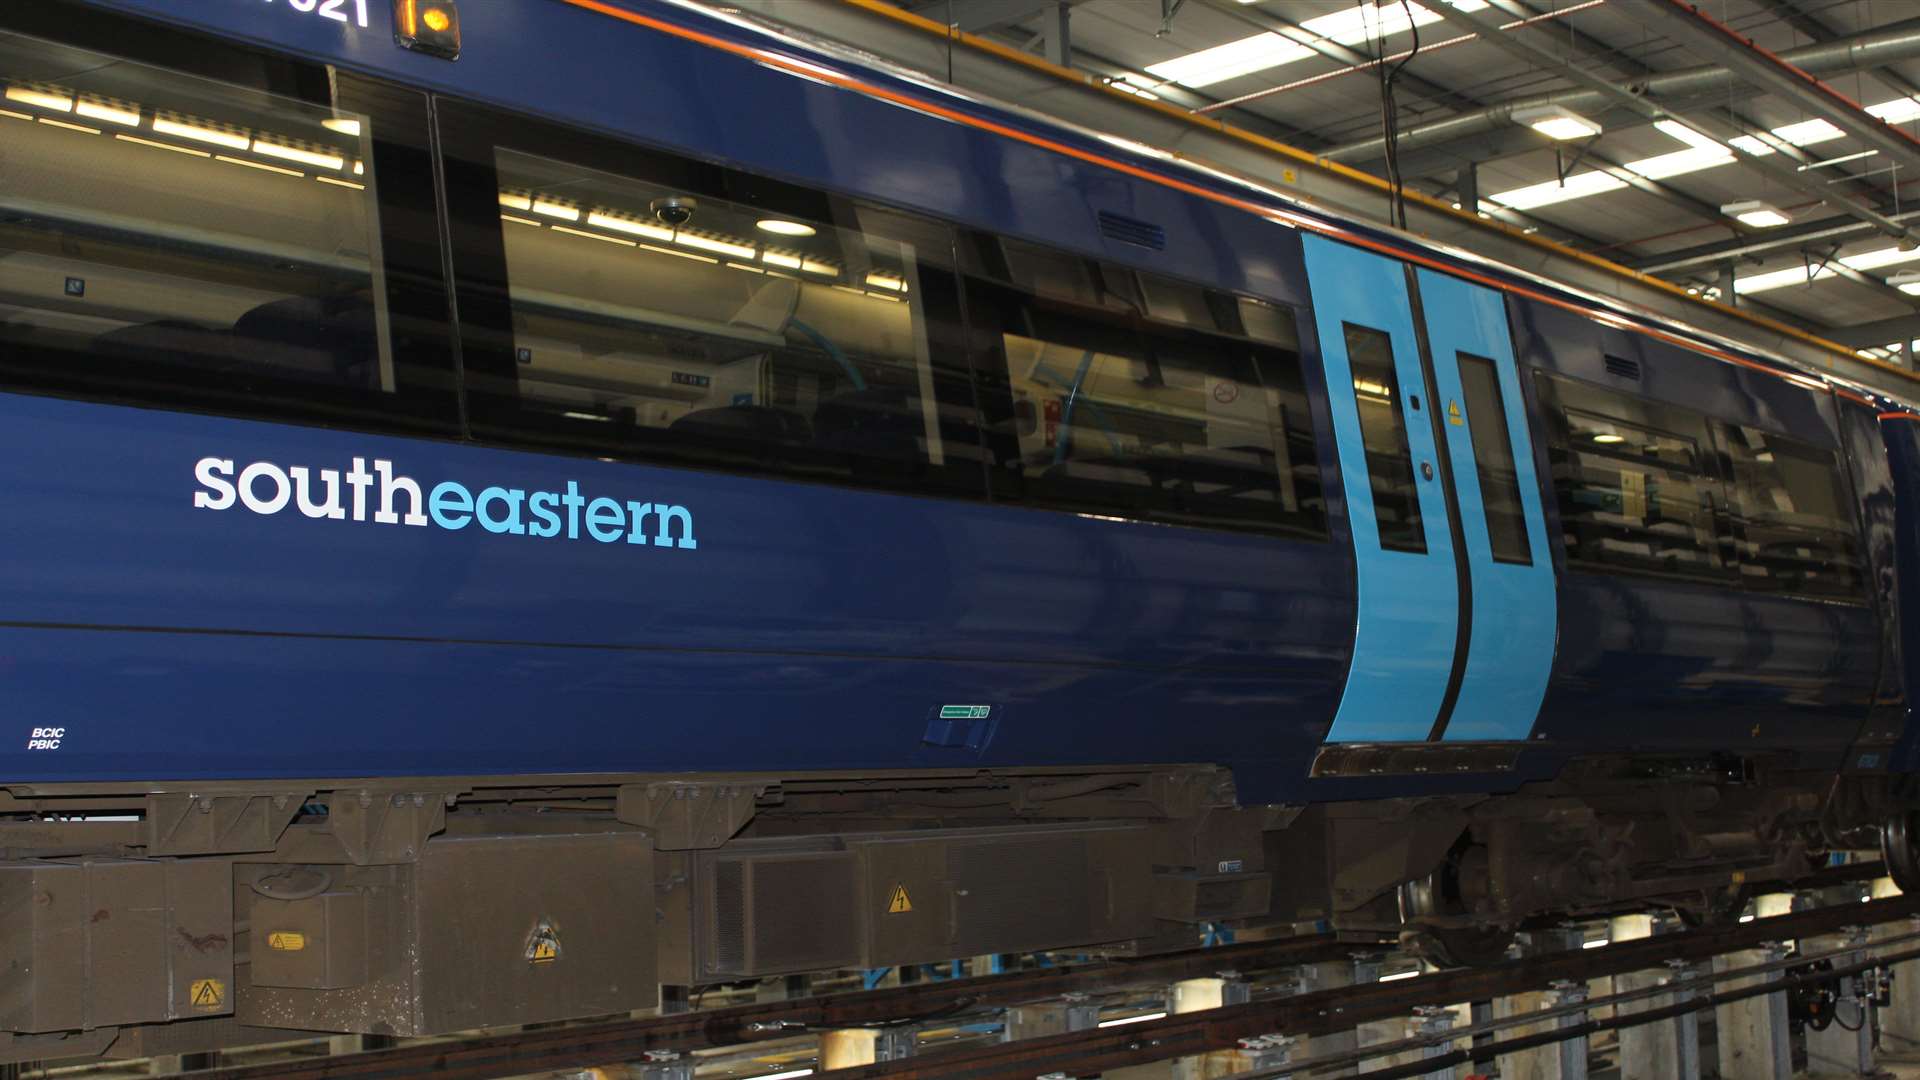 New exterior livery of Class 375 train